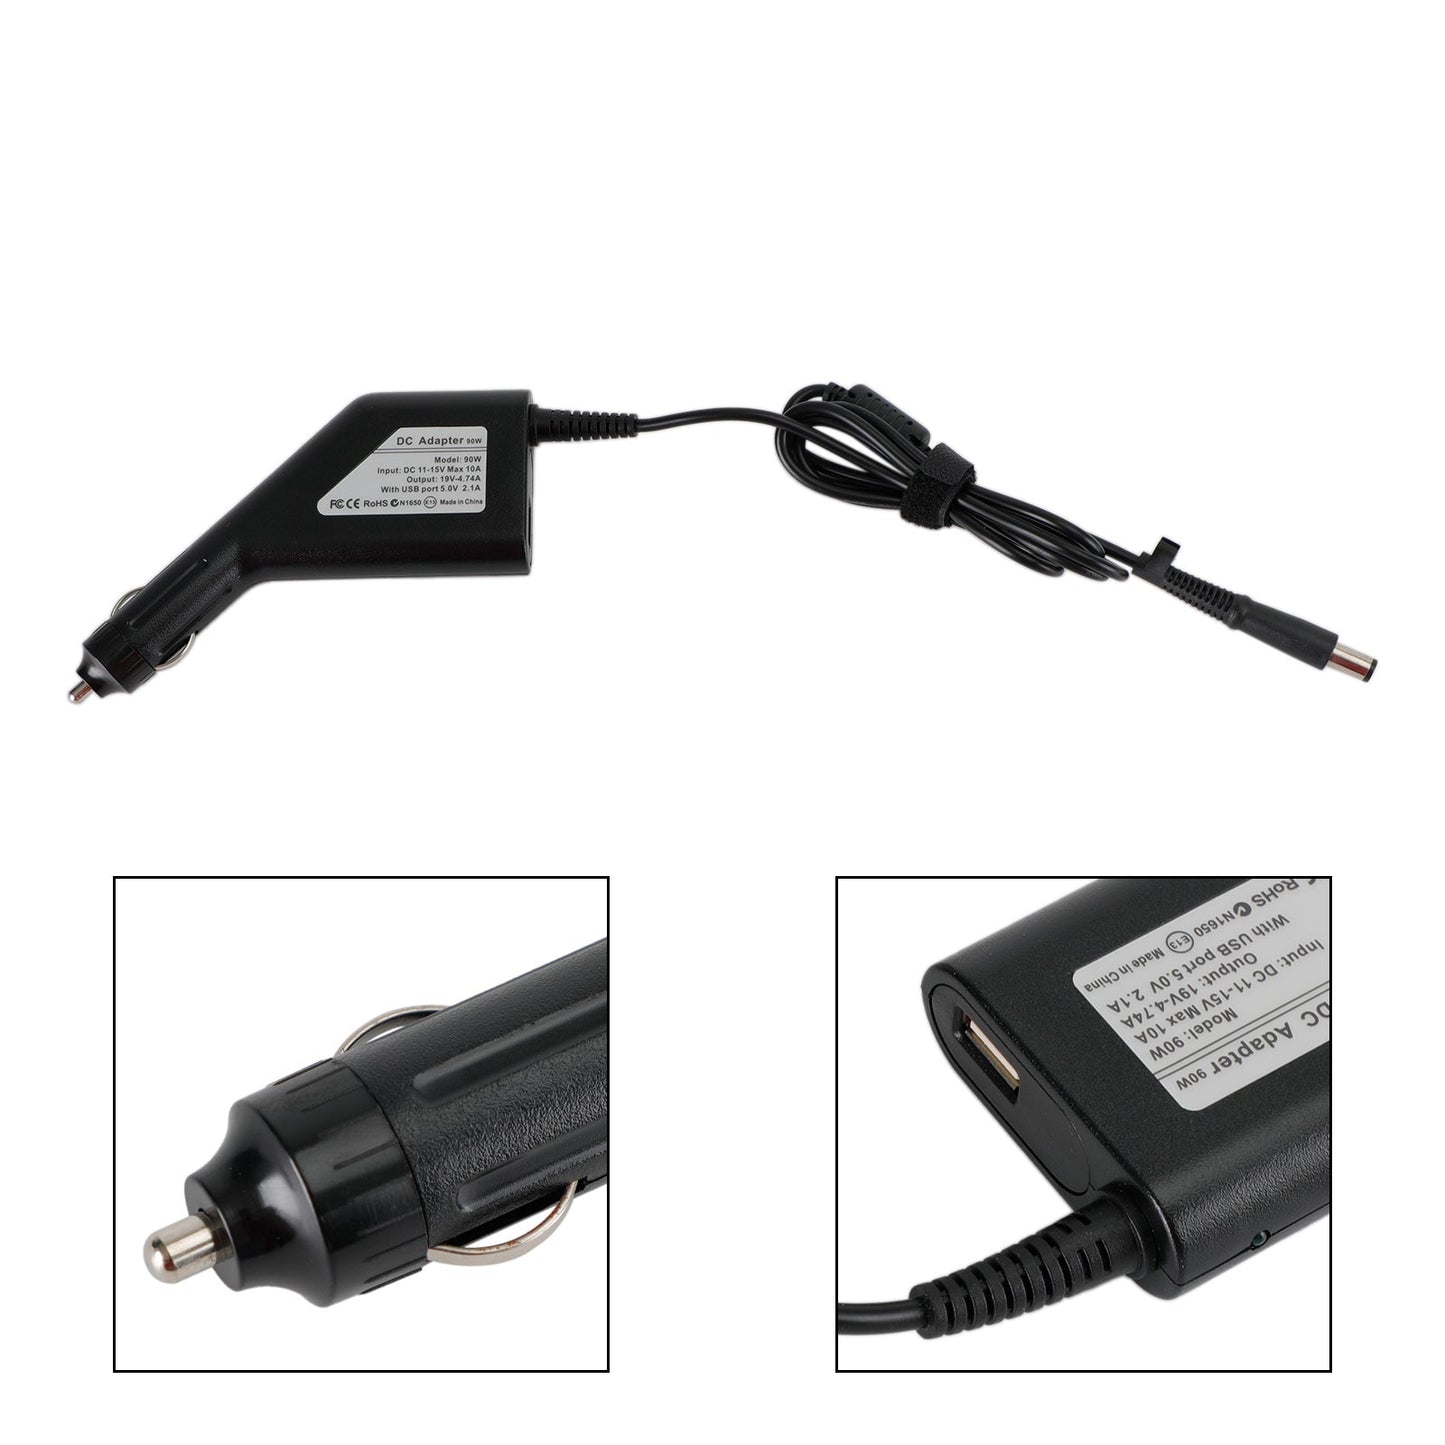 19V 4.74A laptop computers Car Charger Dc Power Adapter for HP Laptop QC3.0 USB